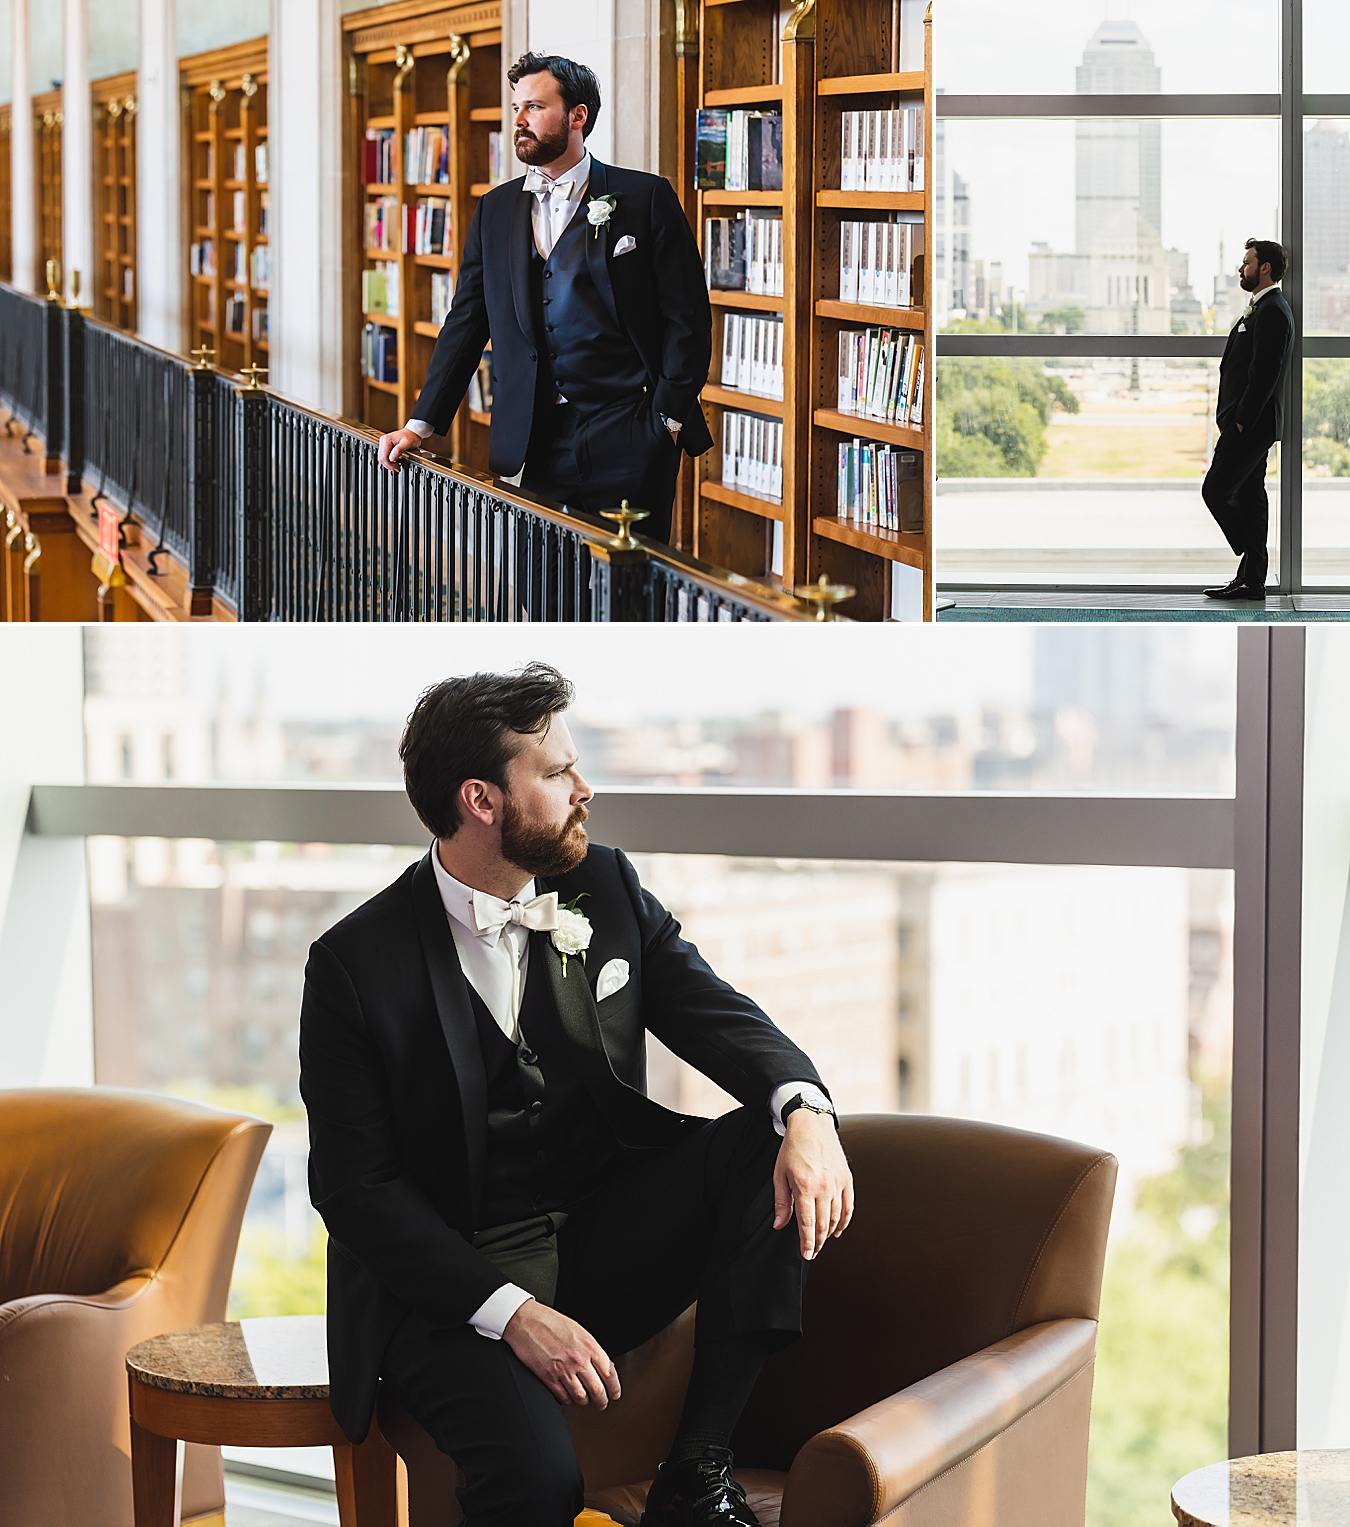 Indianapolis Central Library Wedding | Indianapolis Wedding Photographer | casey and her camera